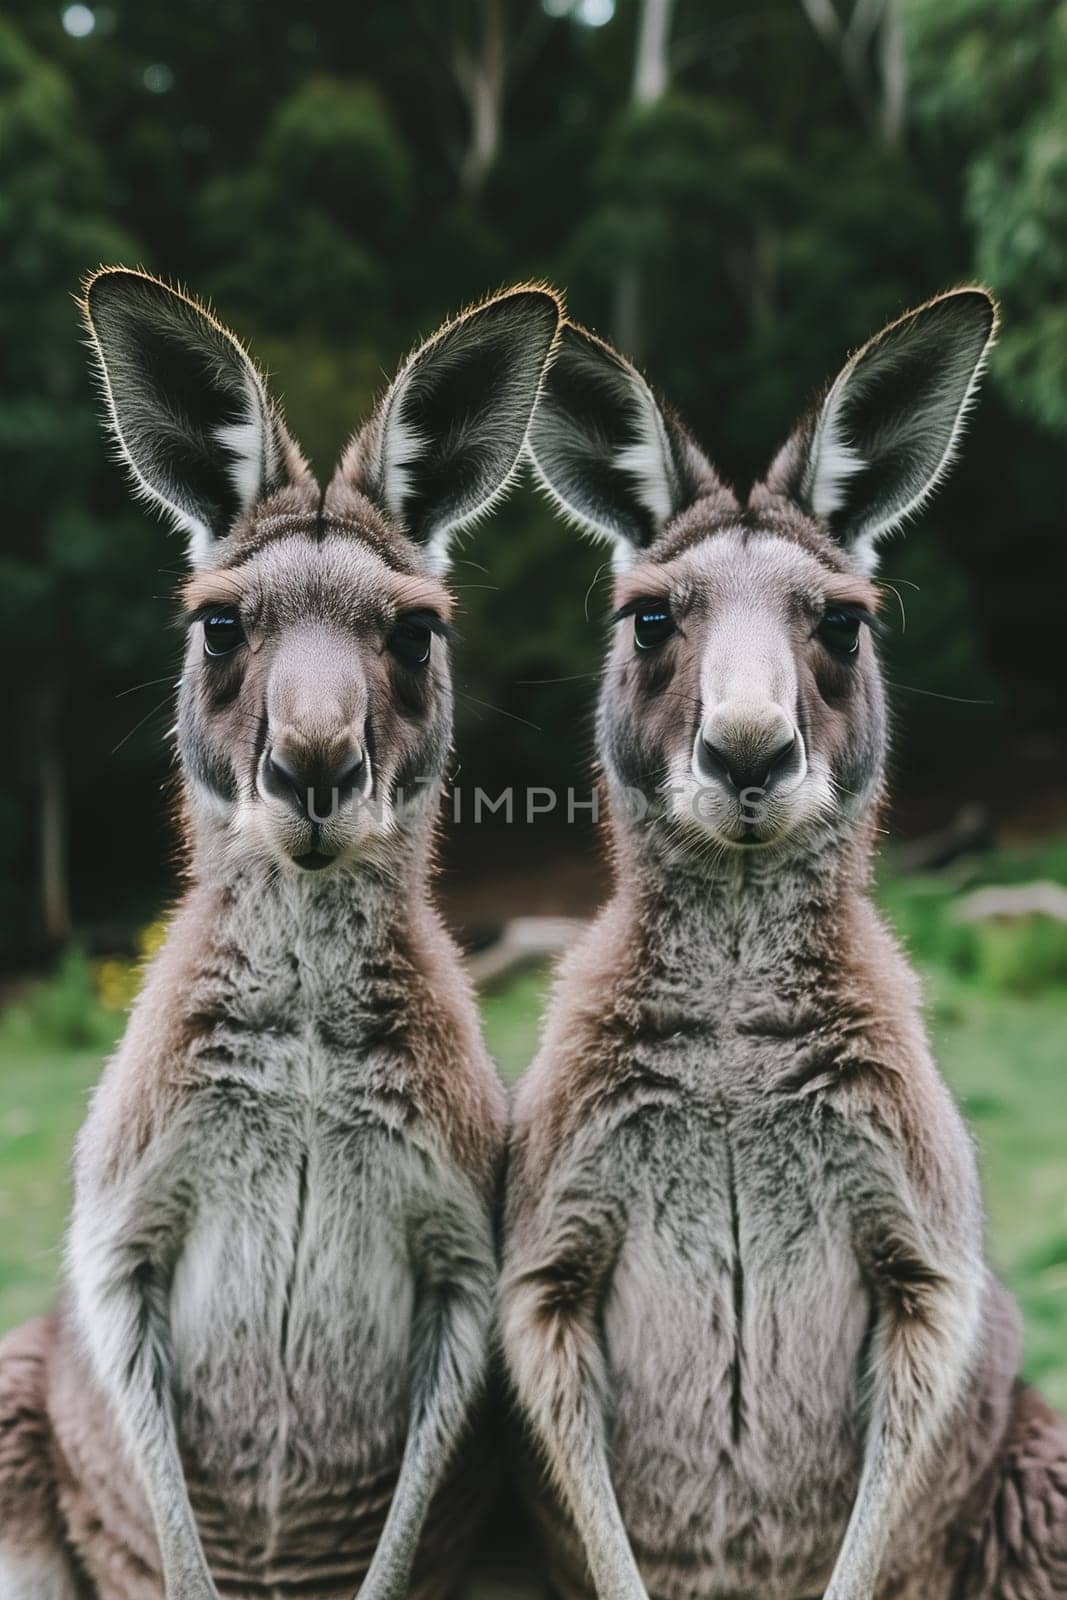 A pair of kangaroos standing side by side in their natural habitat.